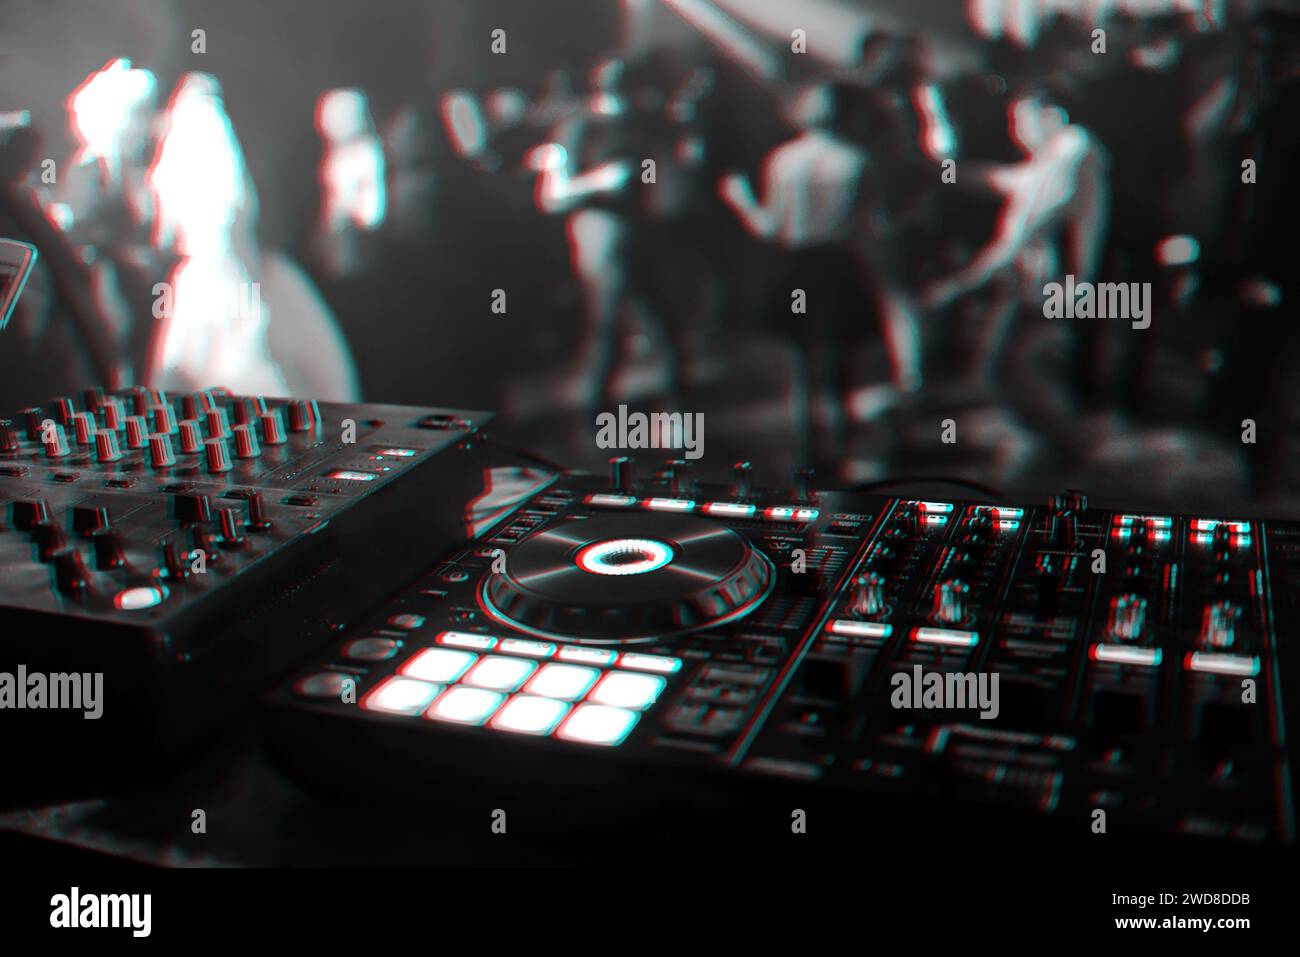 control DJ for mixing music with blurred people dancing at a party in a nightclub. Black and white photo with glitch effect and small grain Stock Photo